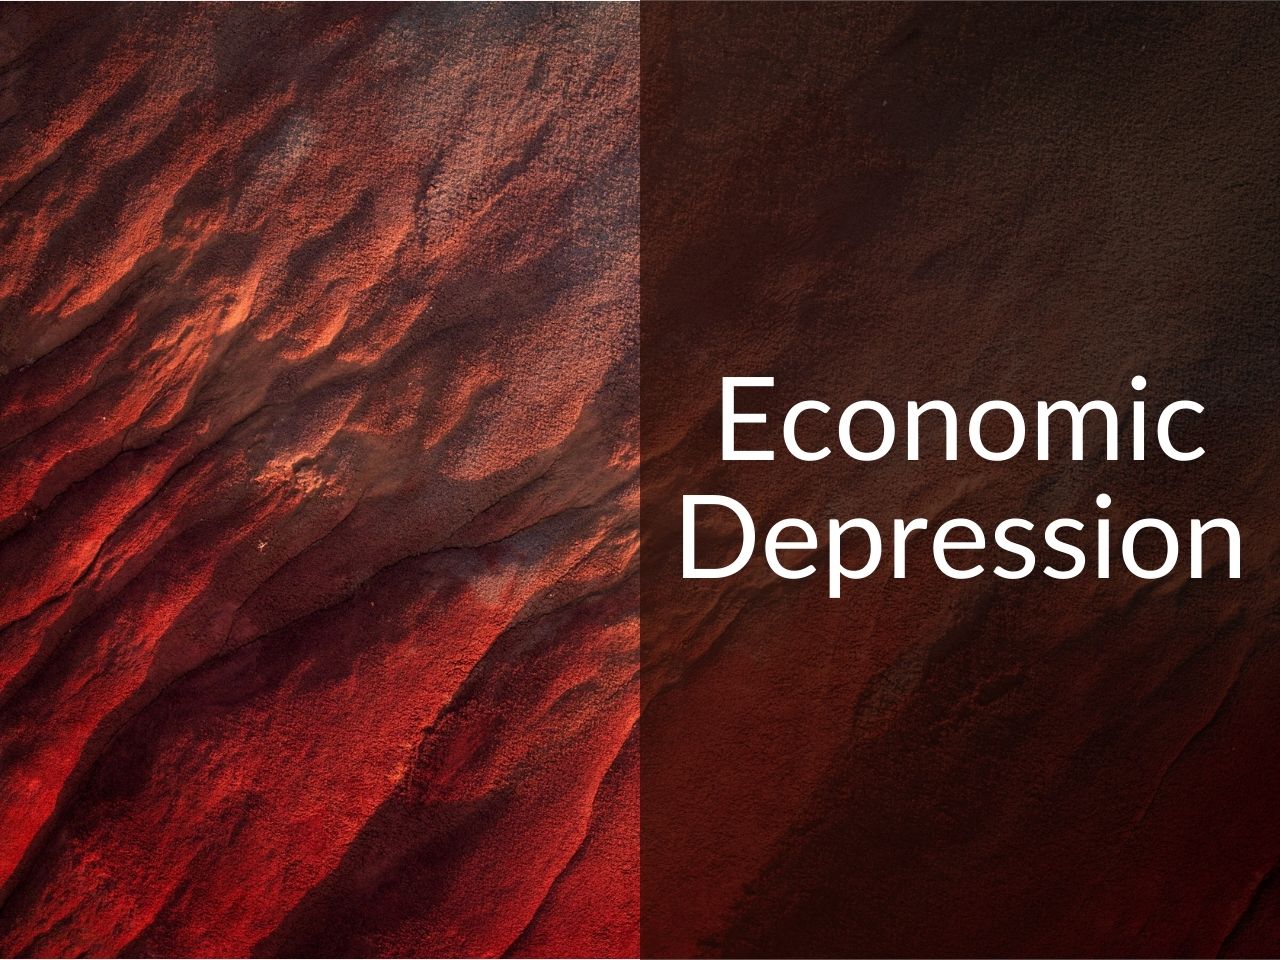 487: Are We Heading for a 2030s Depression? Global Economic and Population Shifts